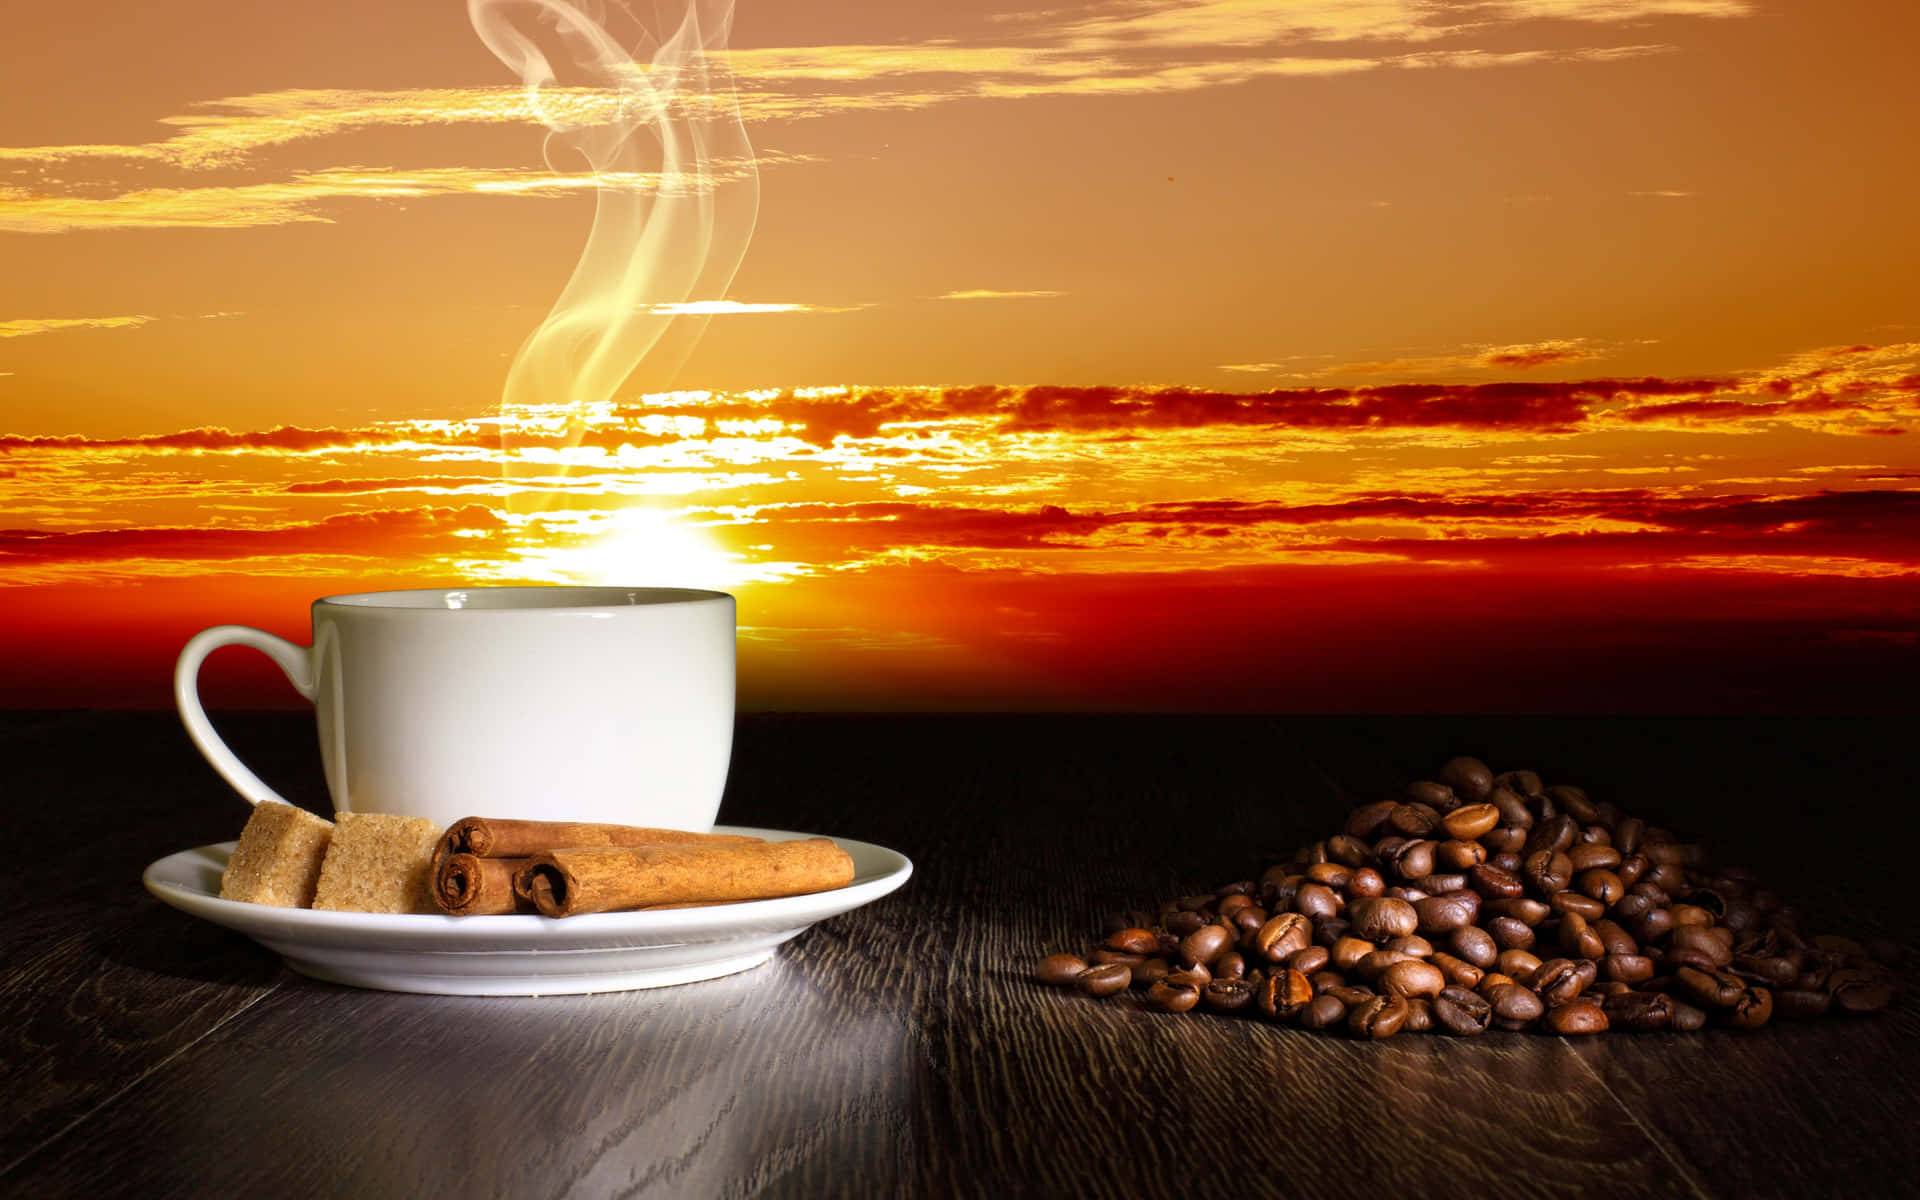 Start your day right with a hot cup of coffee.